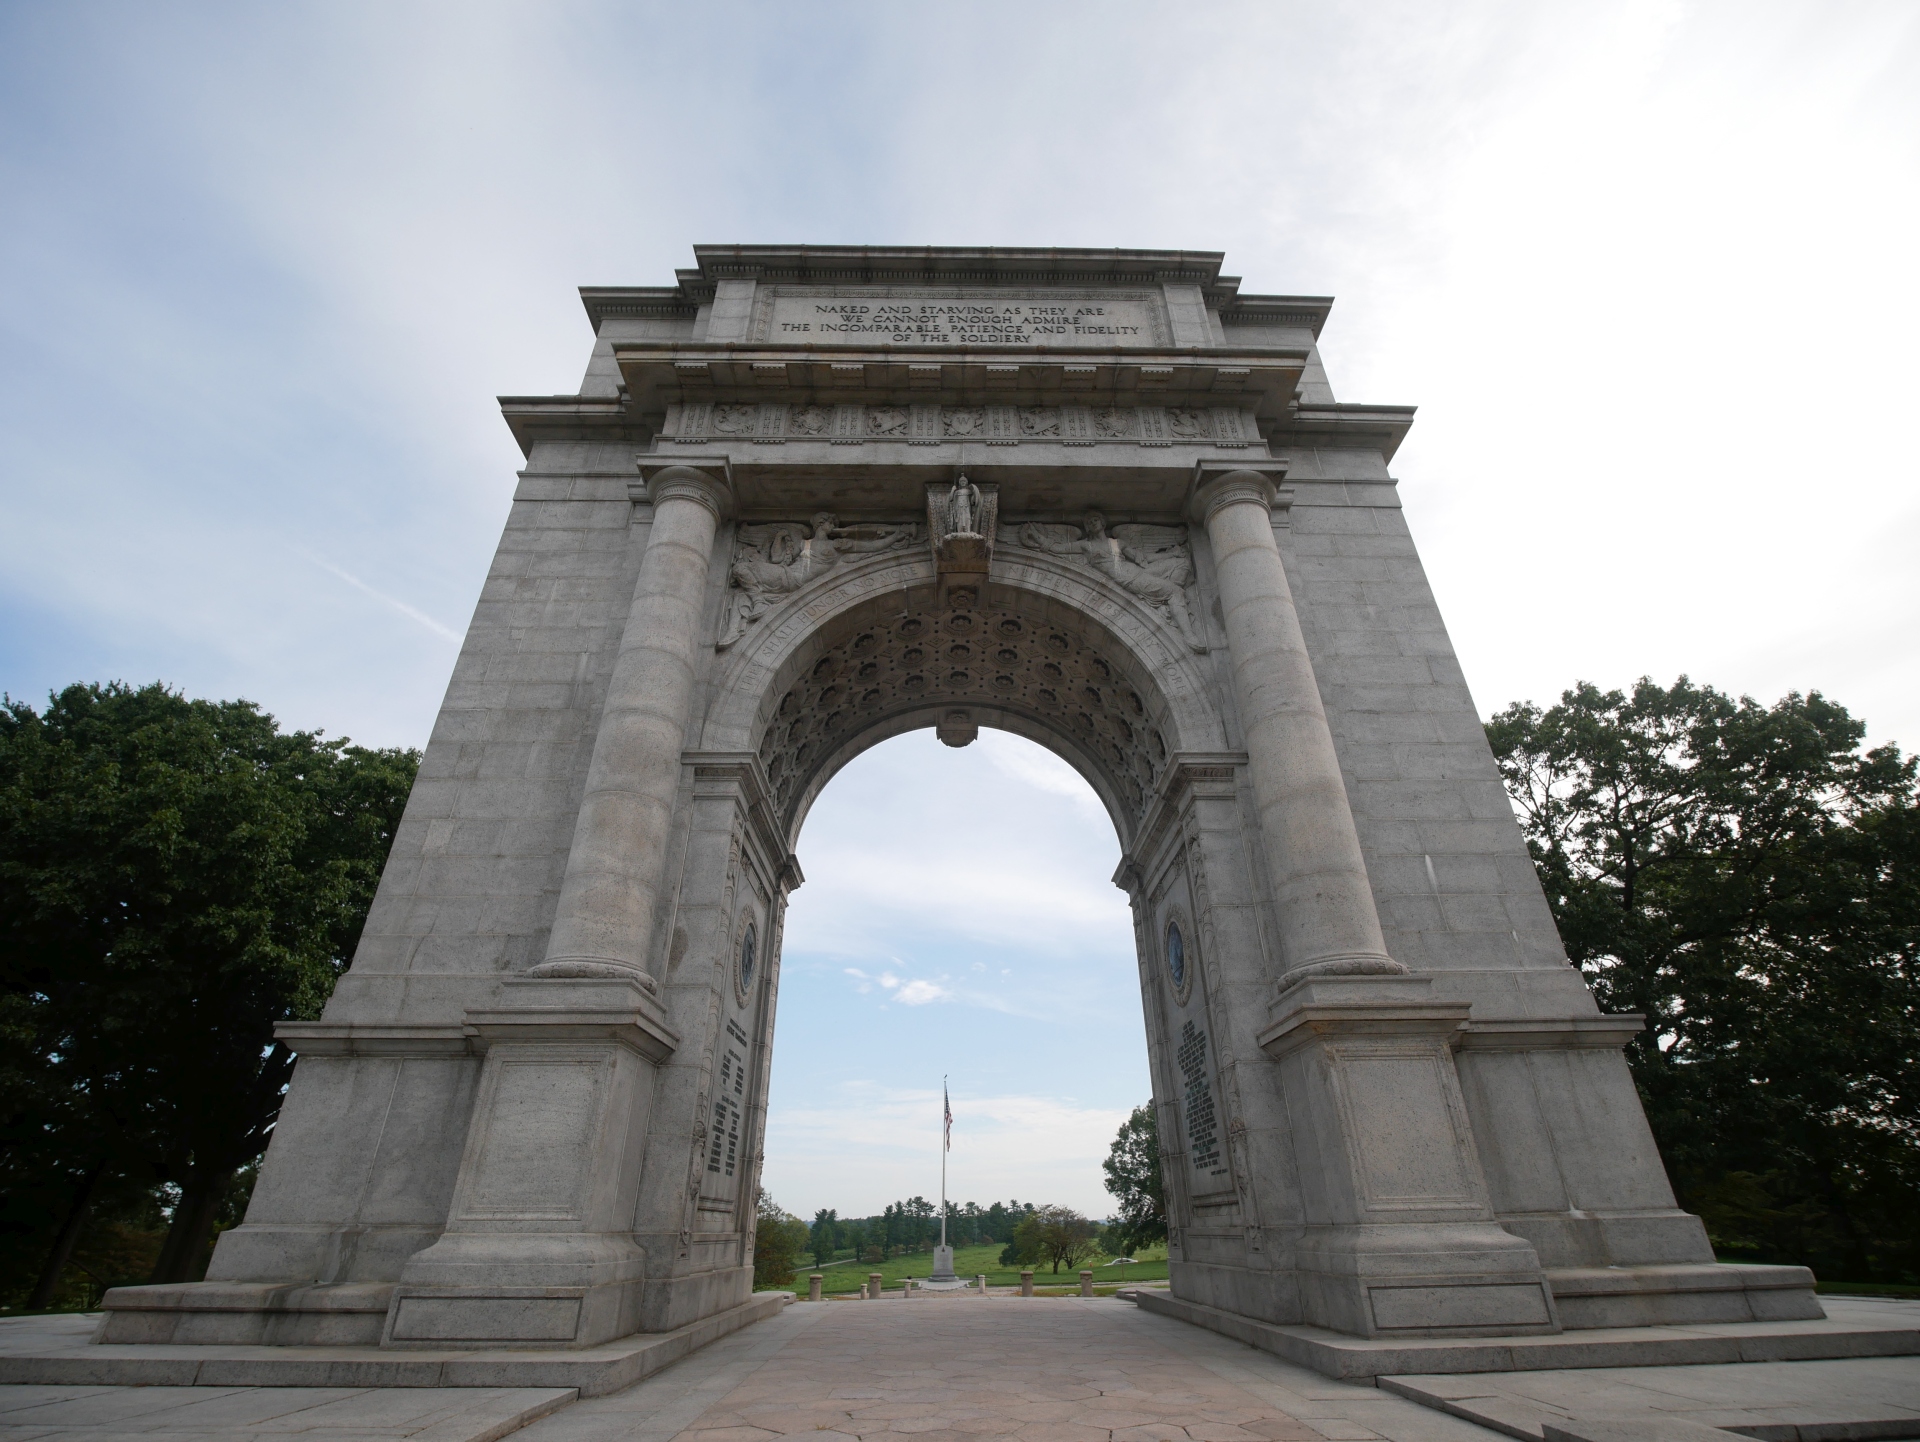 Looking back through the National Memorial Arch, glimpsing the American Flag. September 2020.